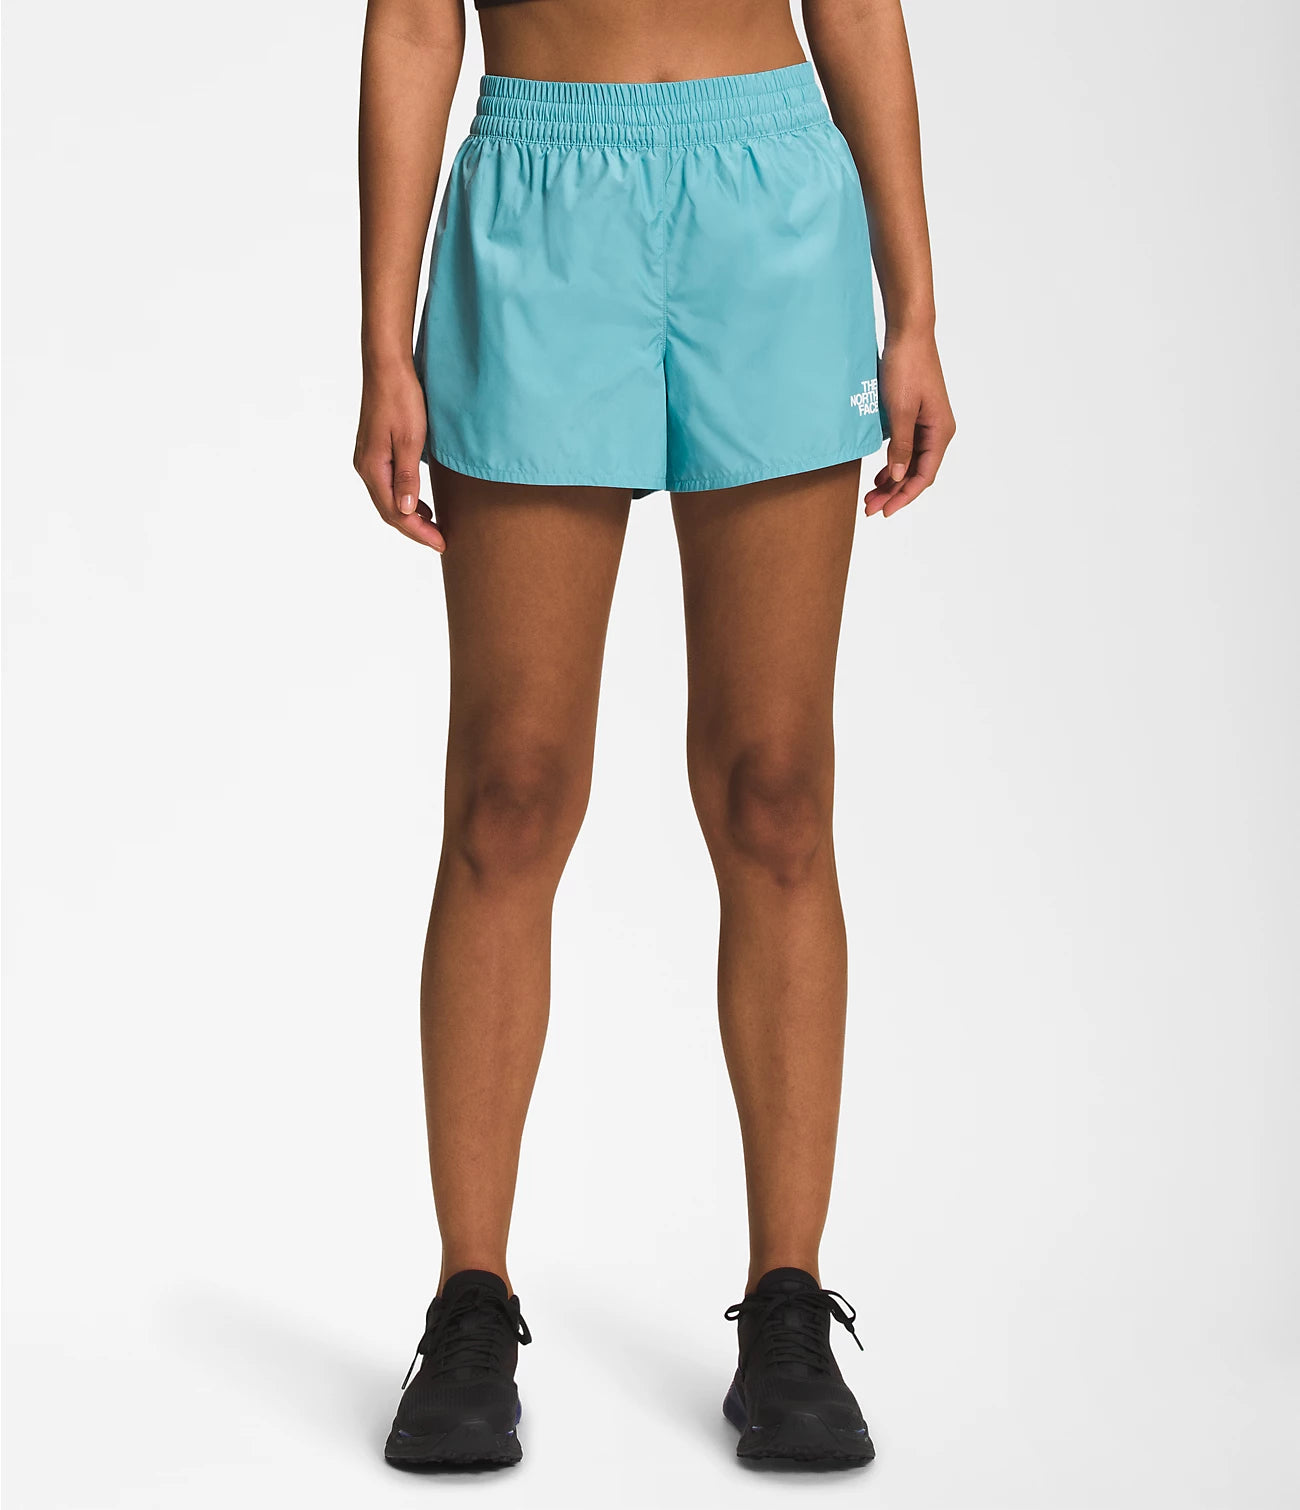 W The North Face Limitless Run Short